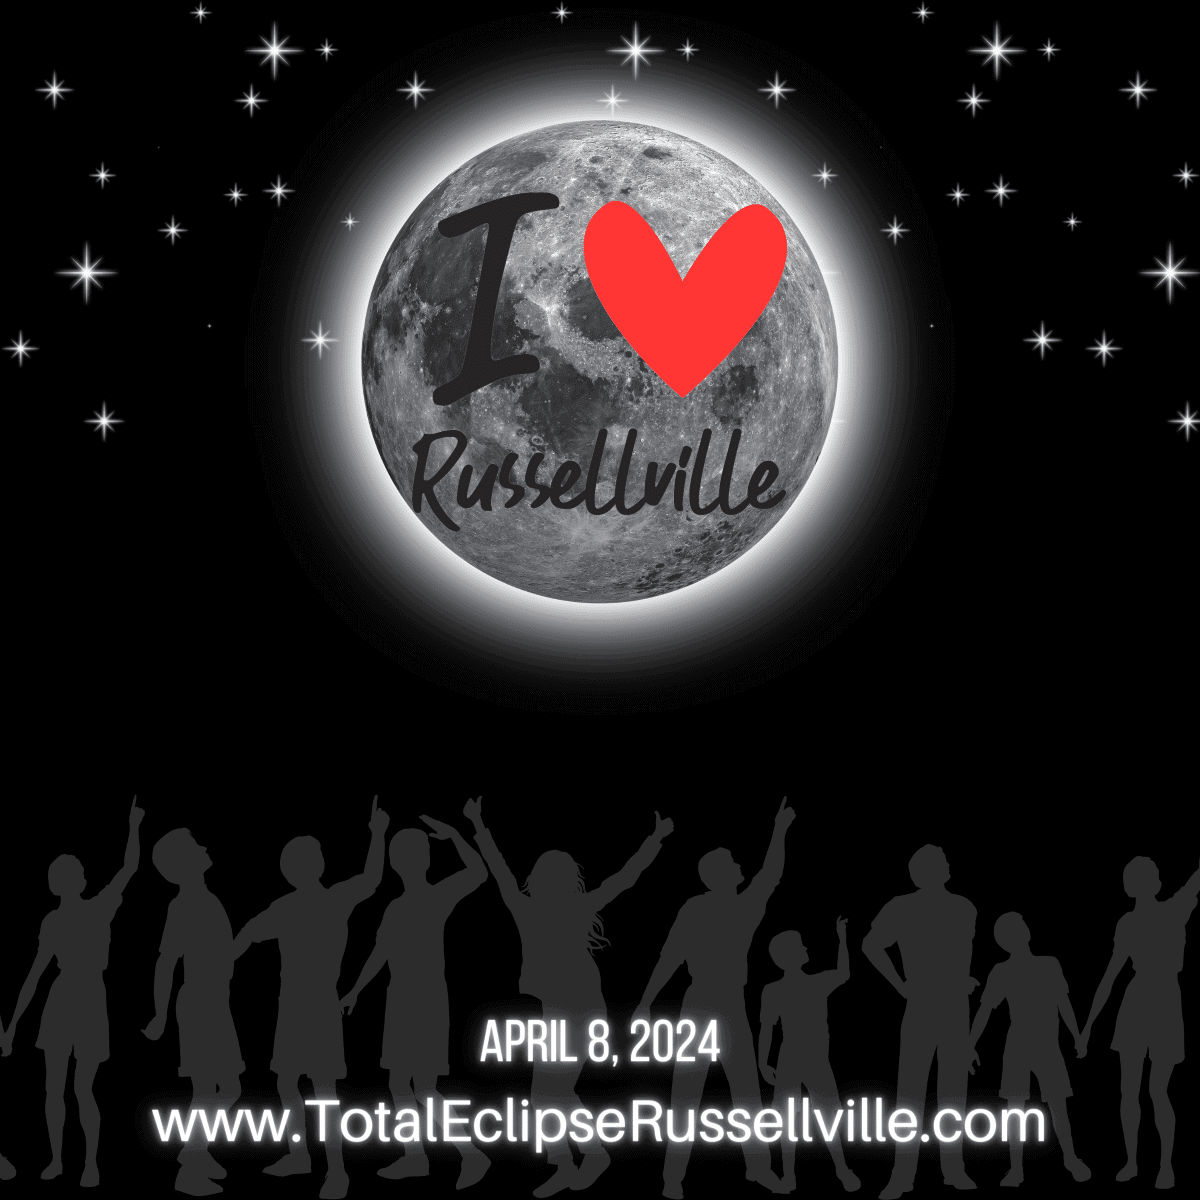 Total Eclipse Russellville April 2024 Visionary Balloonworx